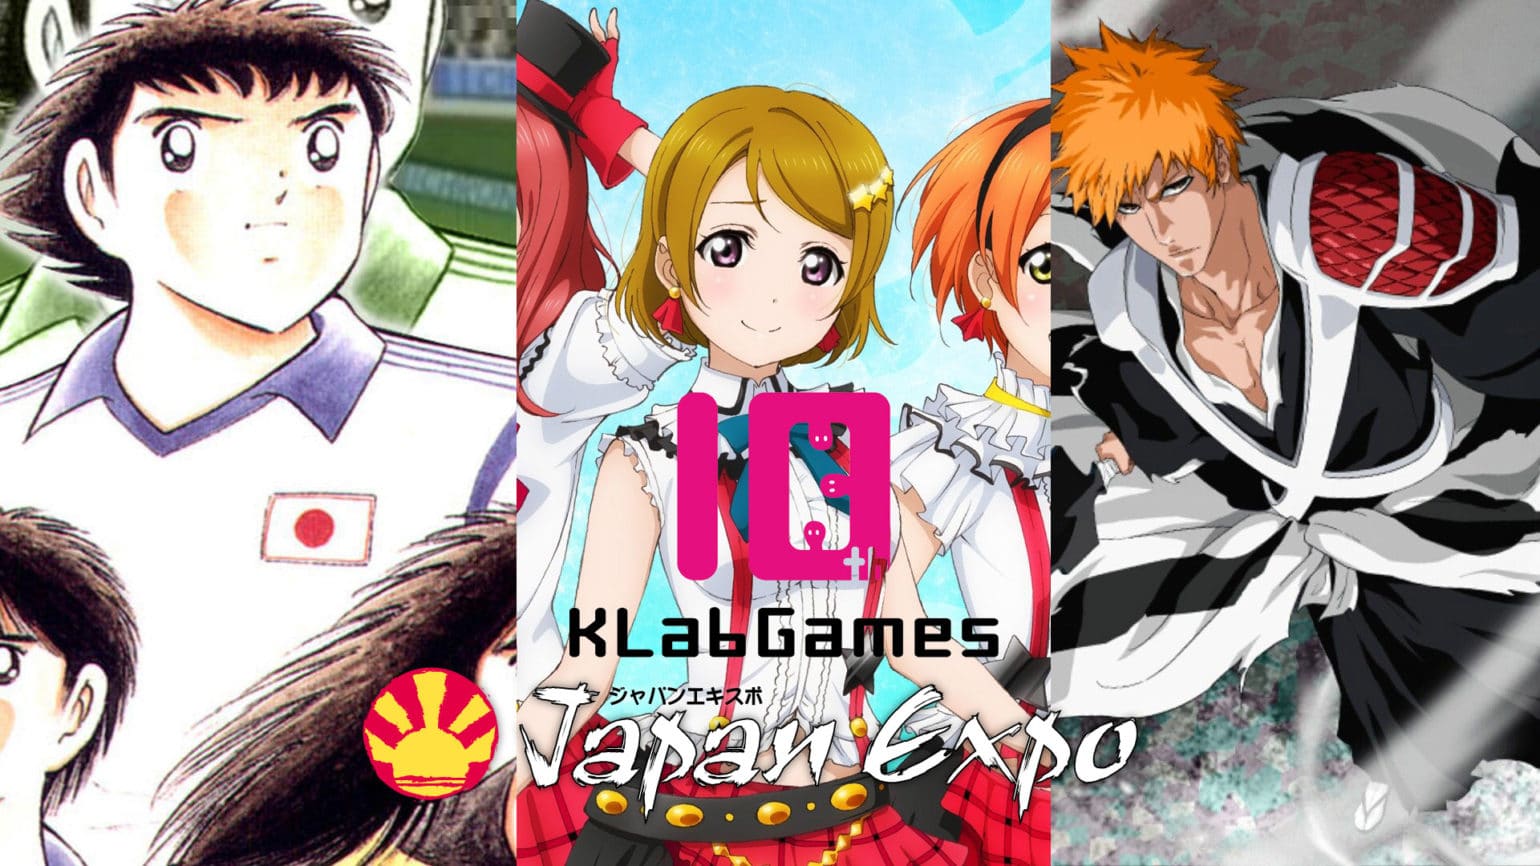 K-Lab Games Japan Expo